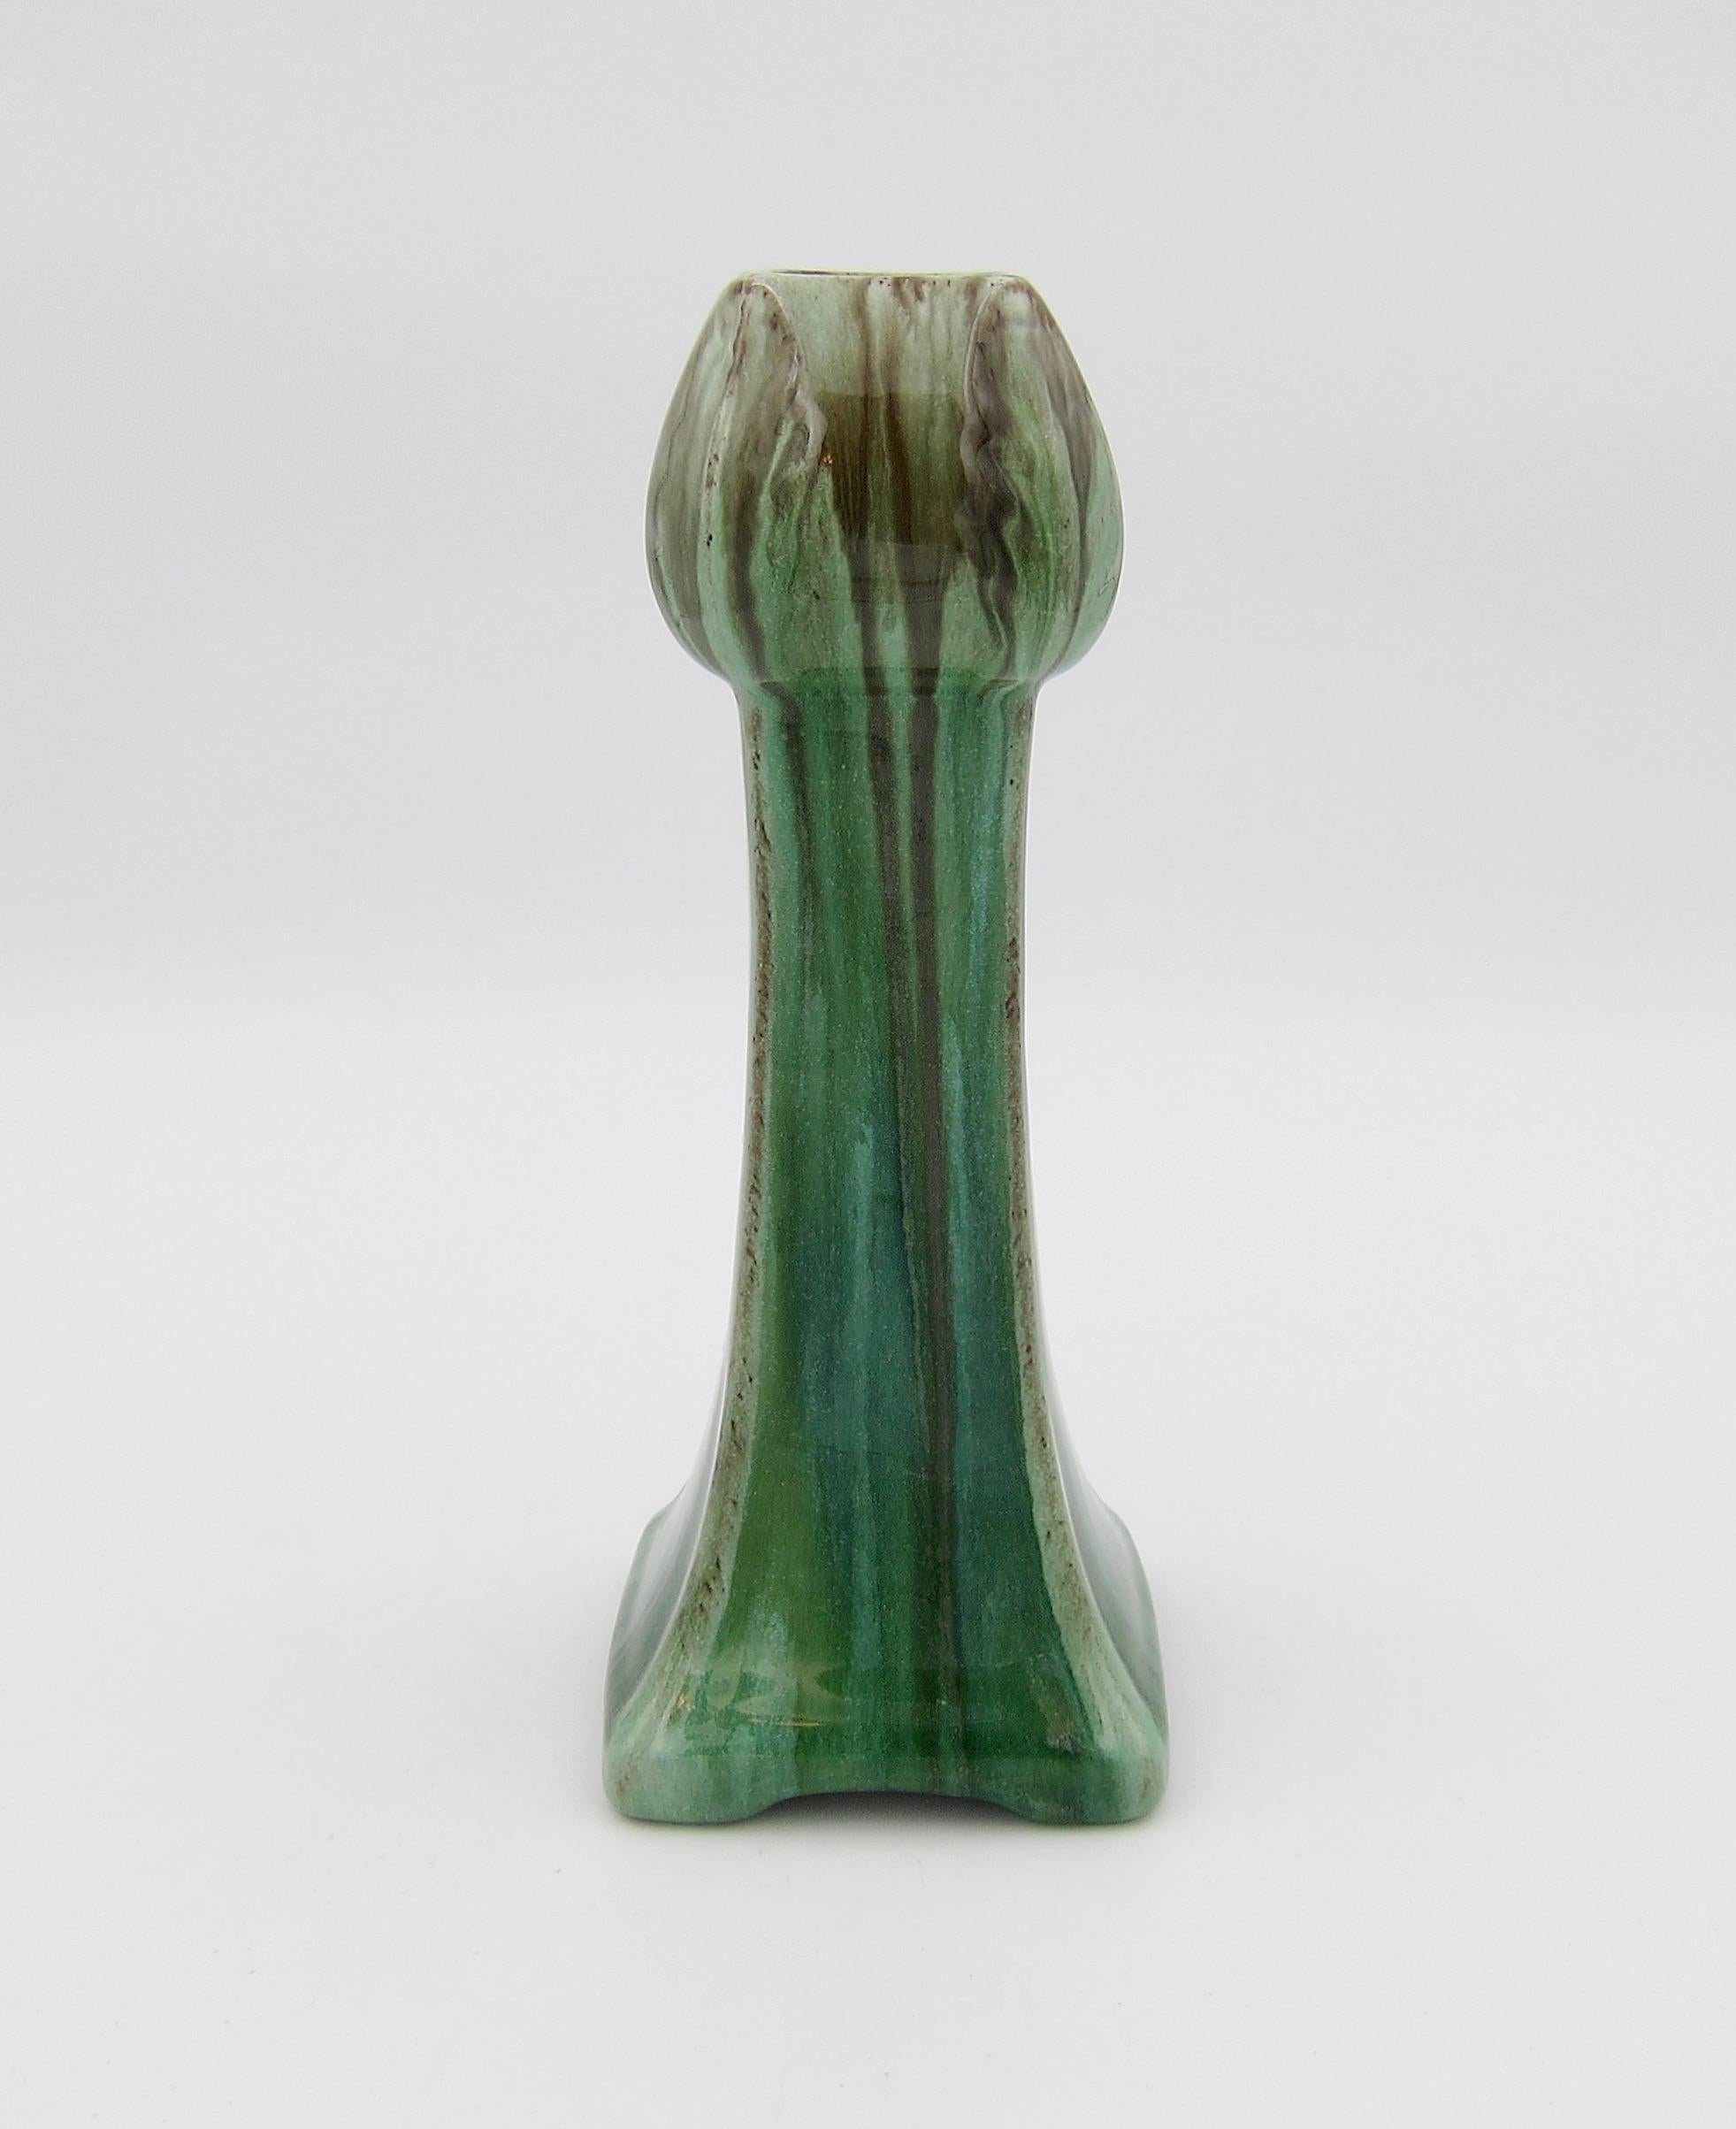 A vintage vase in the Art Nouveau style made in Belgium, circa 1940s. The vessel resembles an abstracted tulip with a flaring foot enveloped in a glossy drip glaze in shades of green with brown accents over a red clay body. The slender vase displays